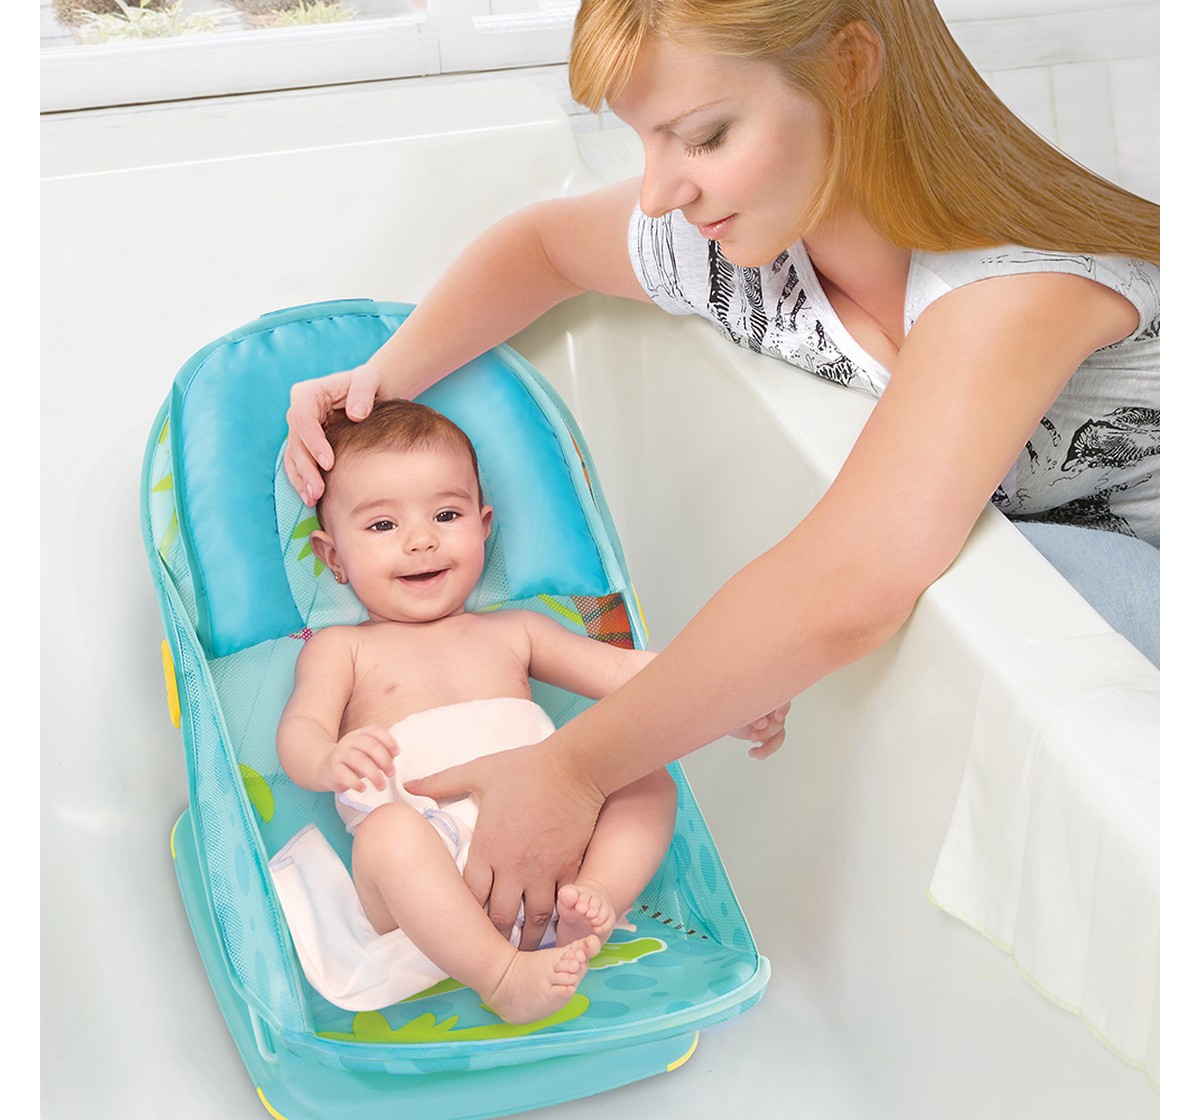 Mothercare | Mastela Deluxe Baby Bather 7167 Teal 3